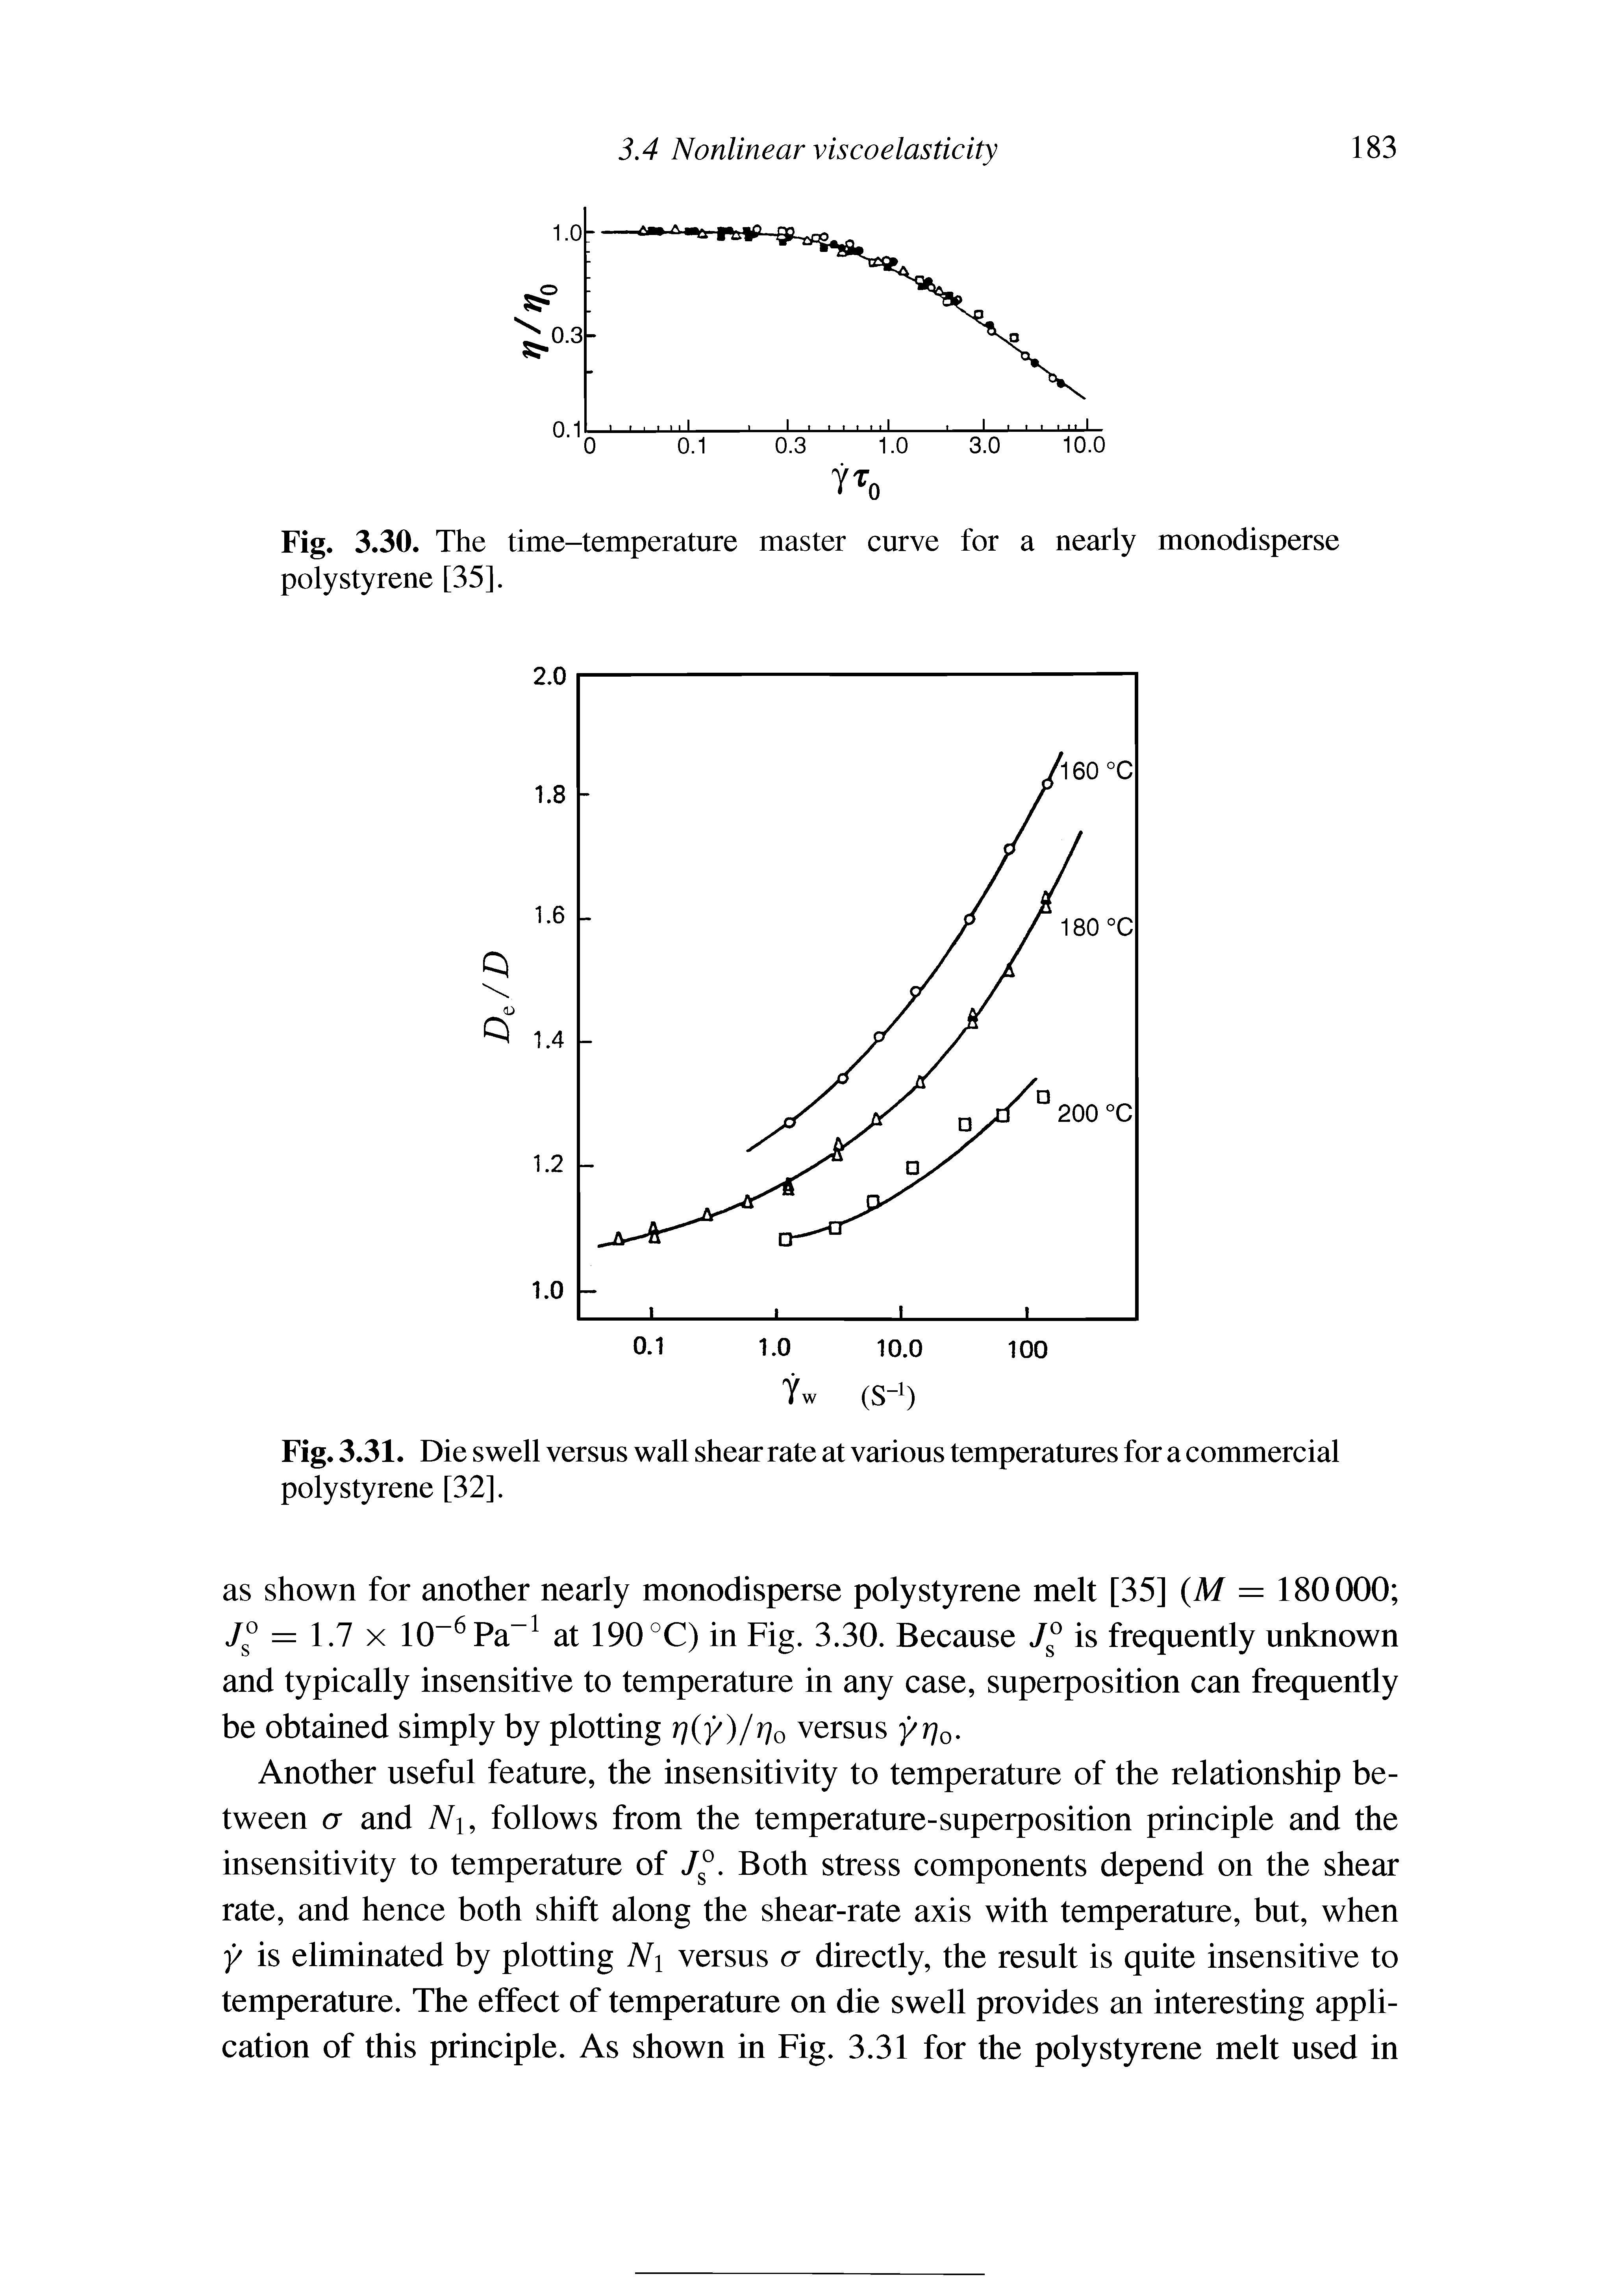 Fig. 3.30. The time-temperature master curve for a nearly monodisperse polystyrene [35].